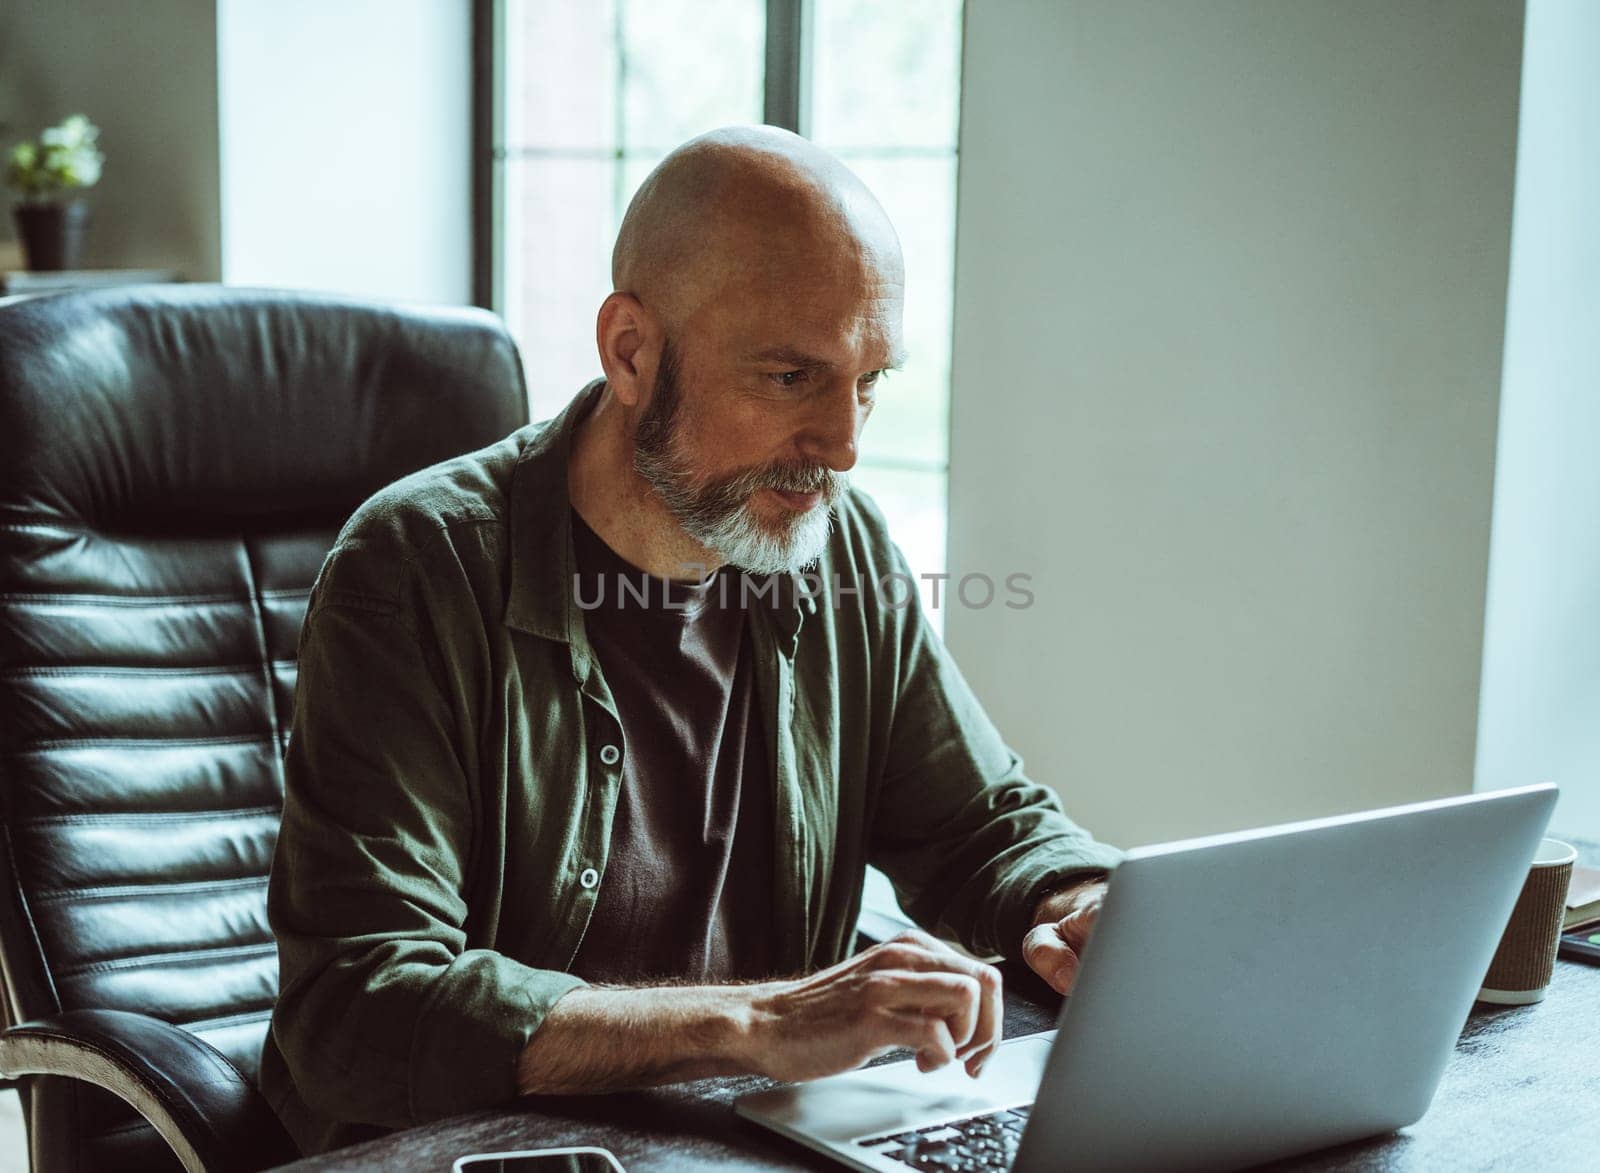 Man deeply concentrated on work as freelancer. With unwavering focus and passion, he immerses himself in his tasks within office space, situated across window. by LipikStockMedia